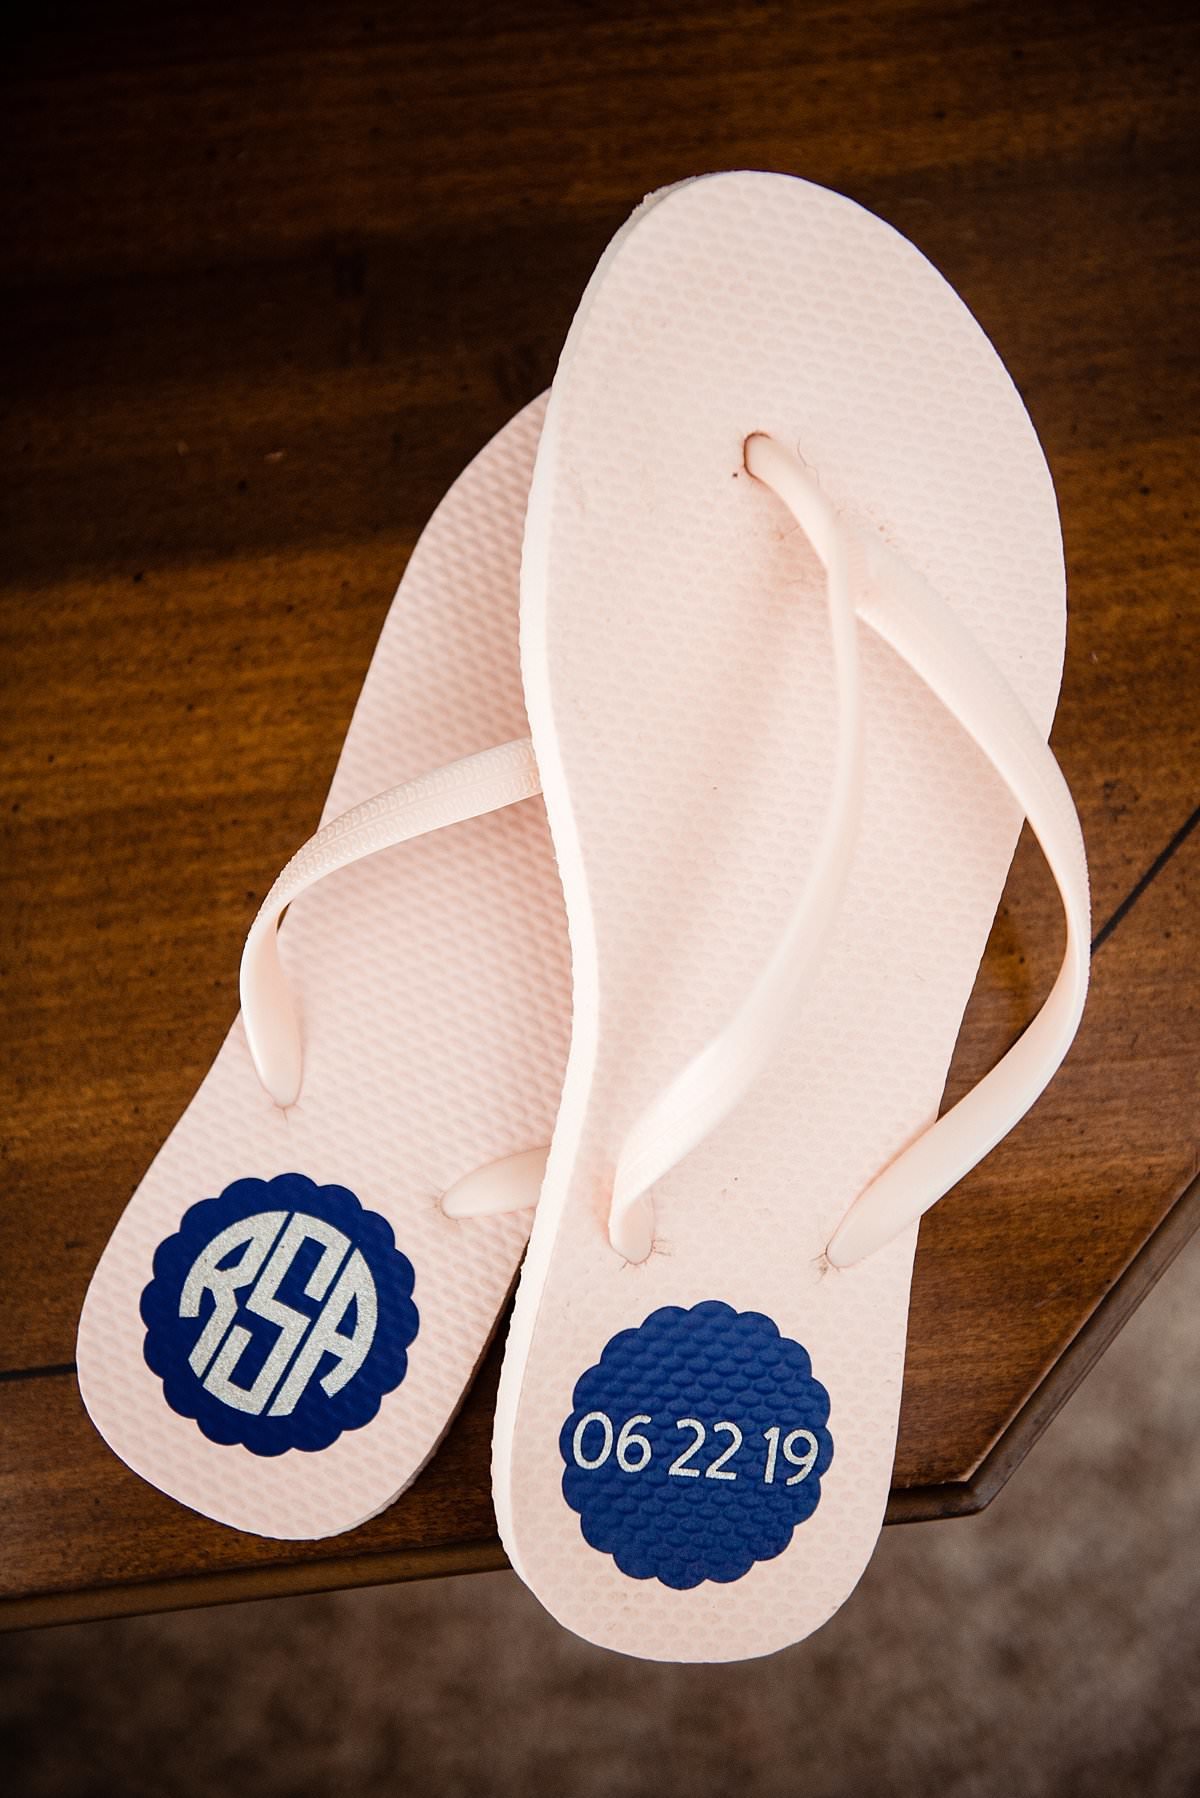 Pink flipflops with clue monogram and wedding date